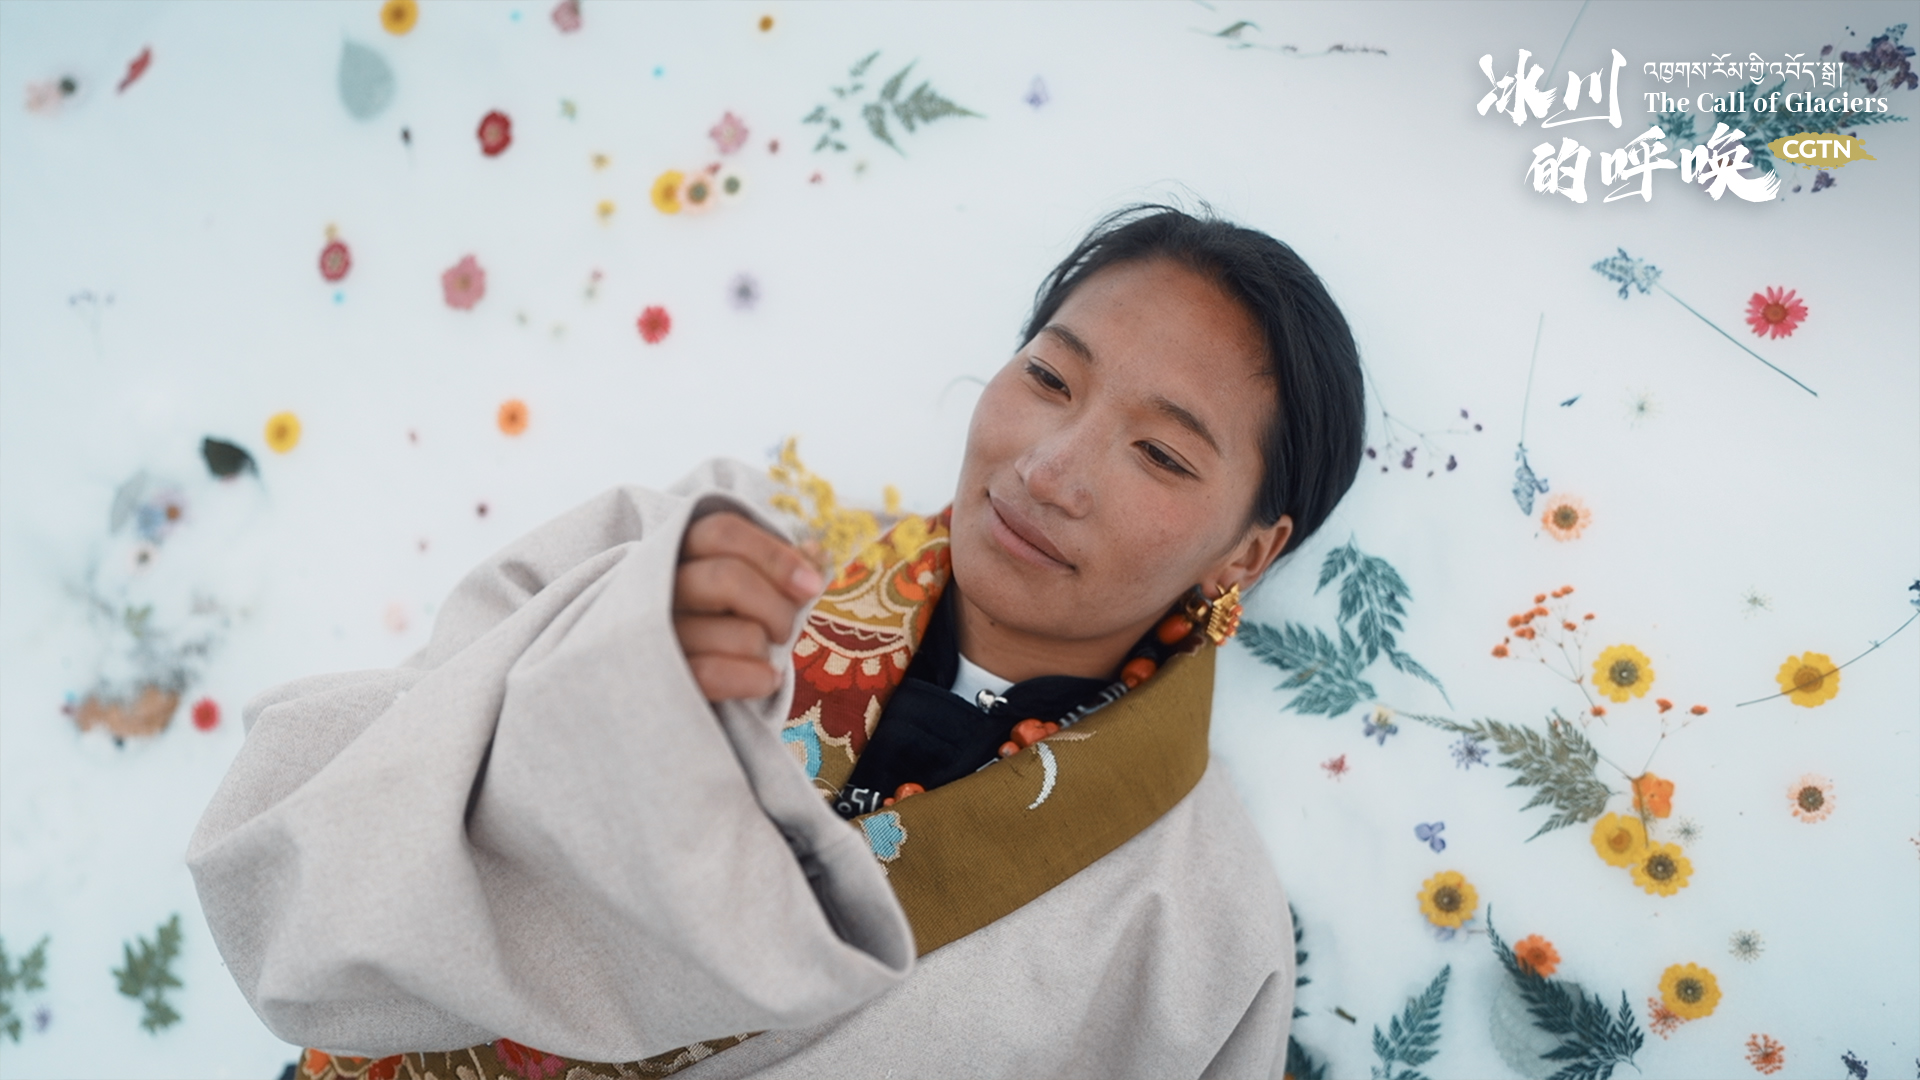 Palyang's Story beyond CGTN documentary film 'The Call of Glaciers'